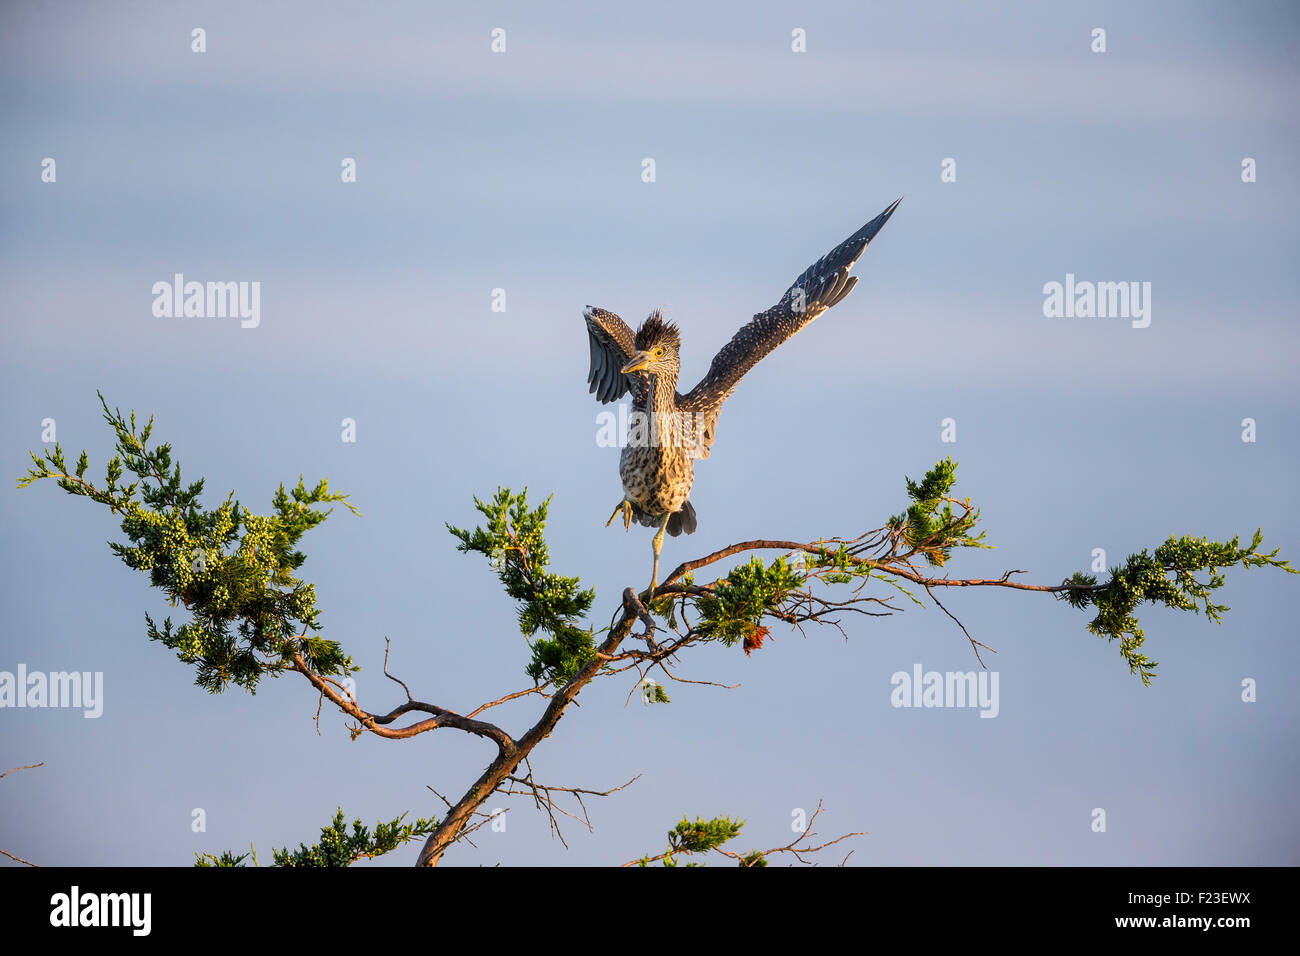 Black-crowned Night Heron spreading its wings / finding balance right after landing at the top of the tree Stock Photo